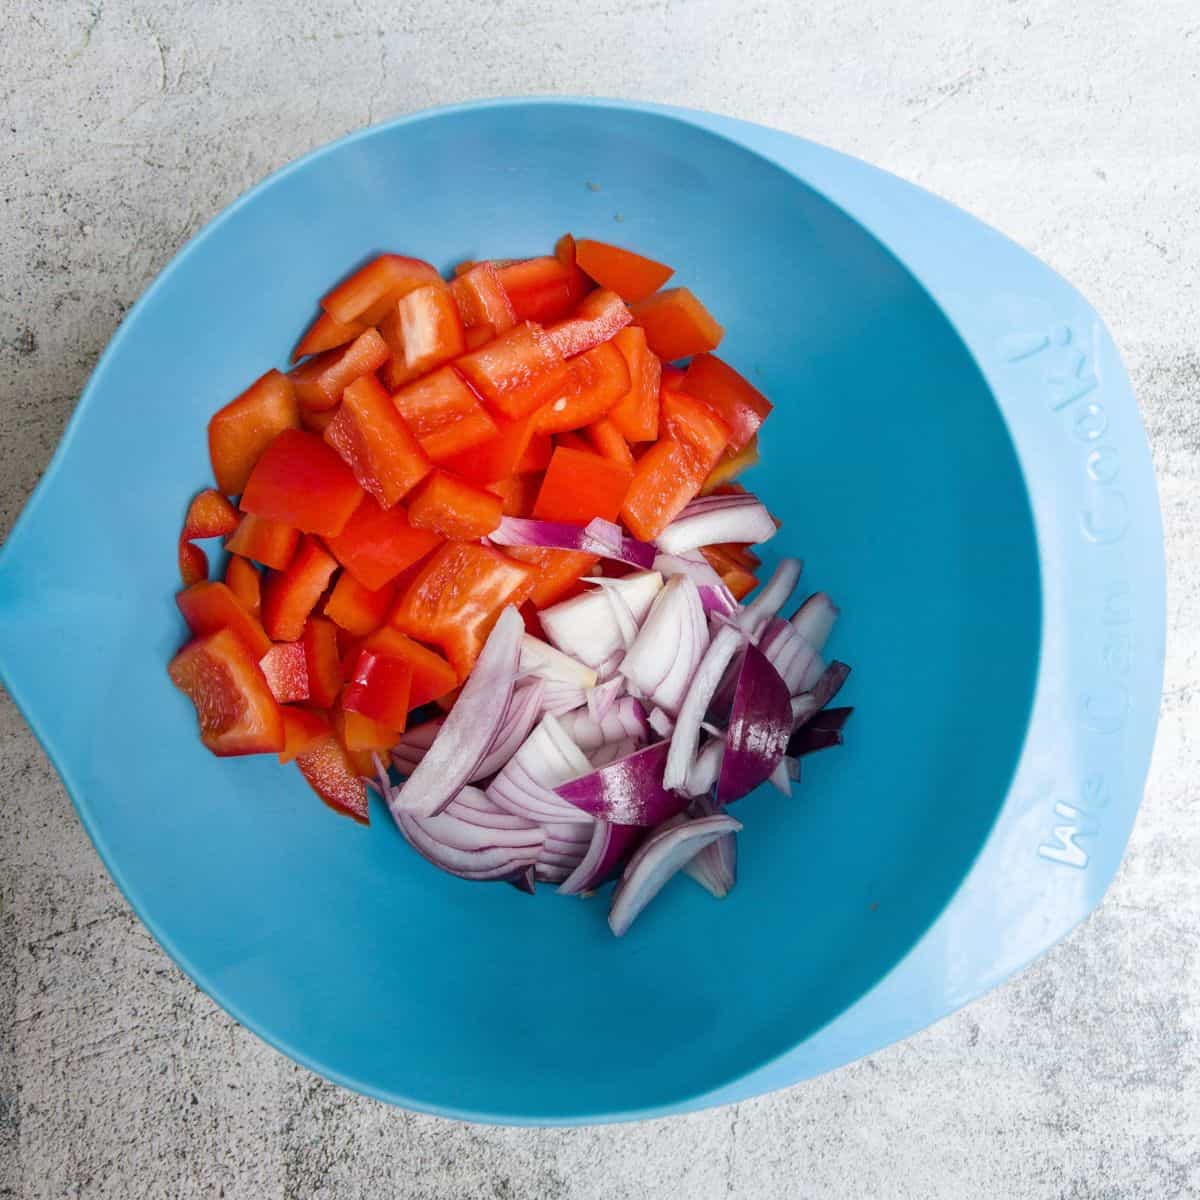 Chunks of red pepper and red onion raw in a blue bowl.